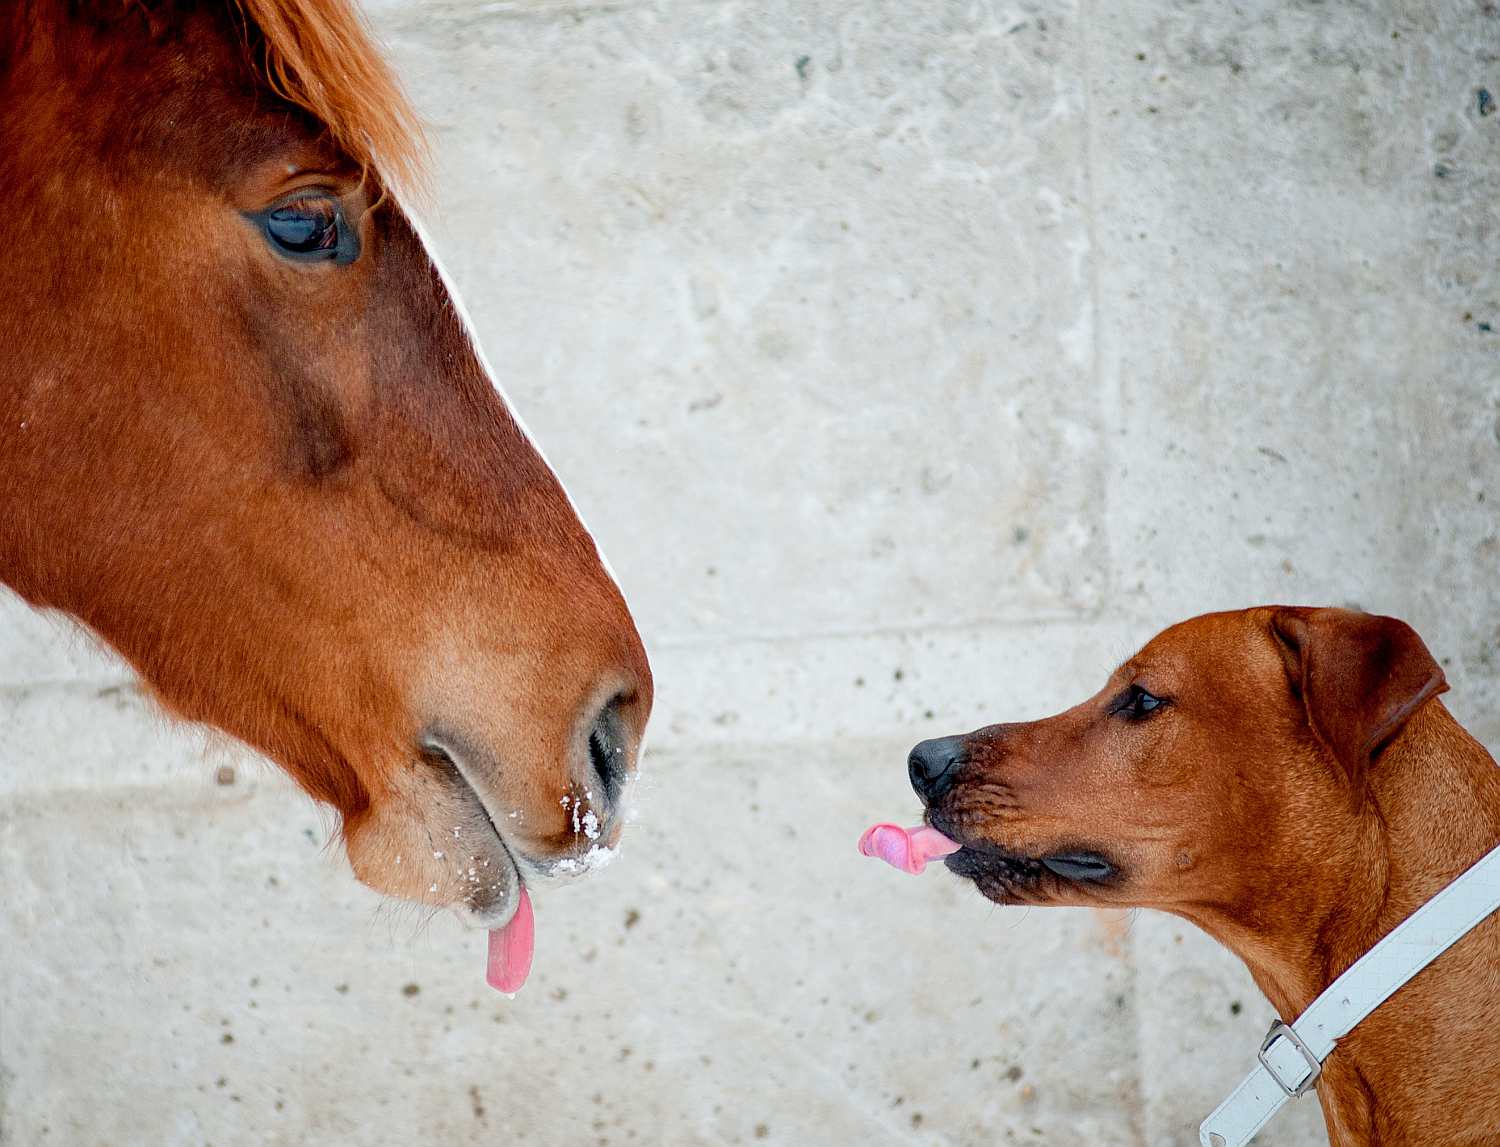 Dog and horse looking at each other